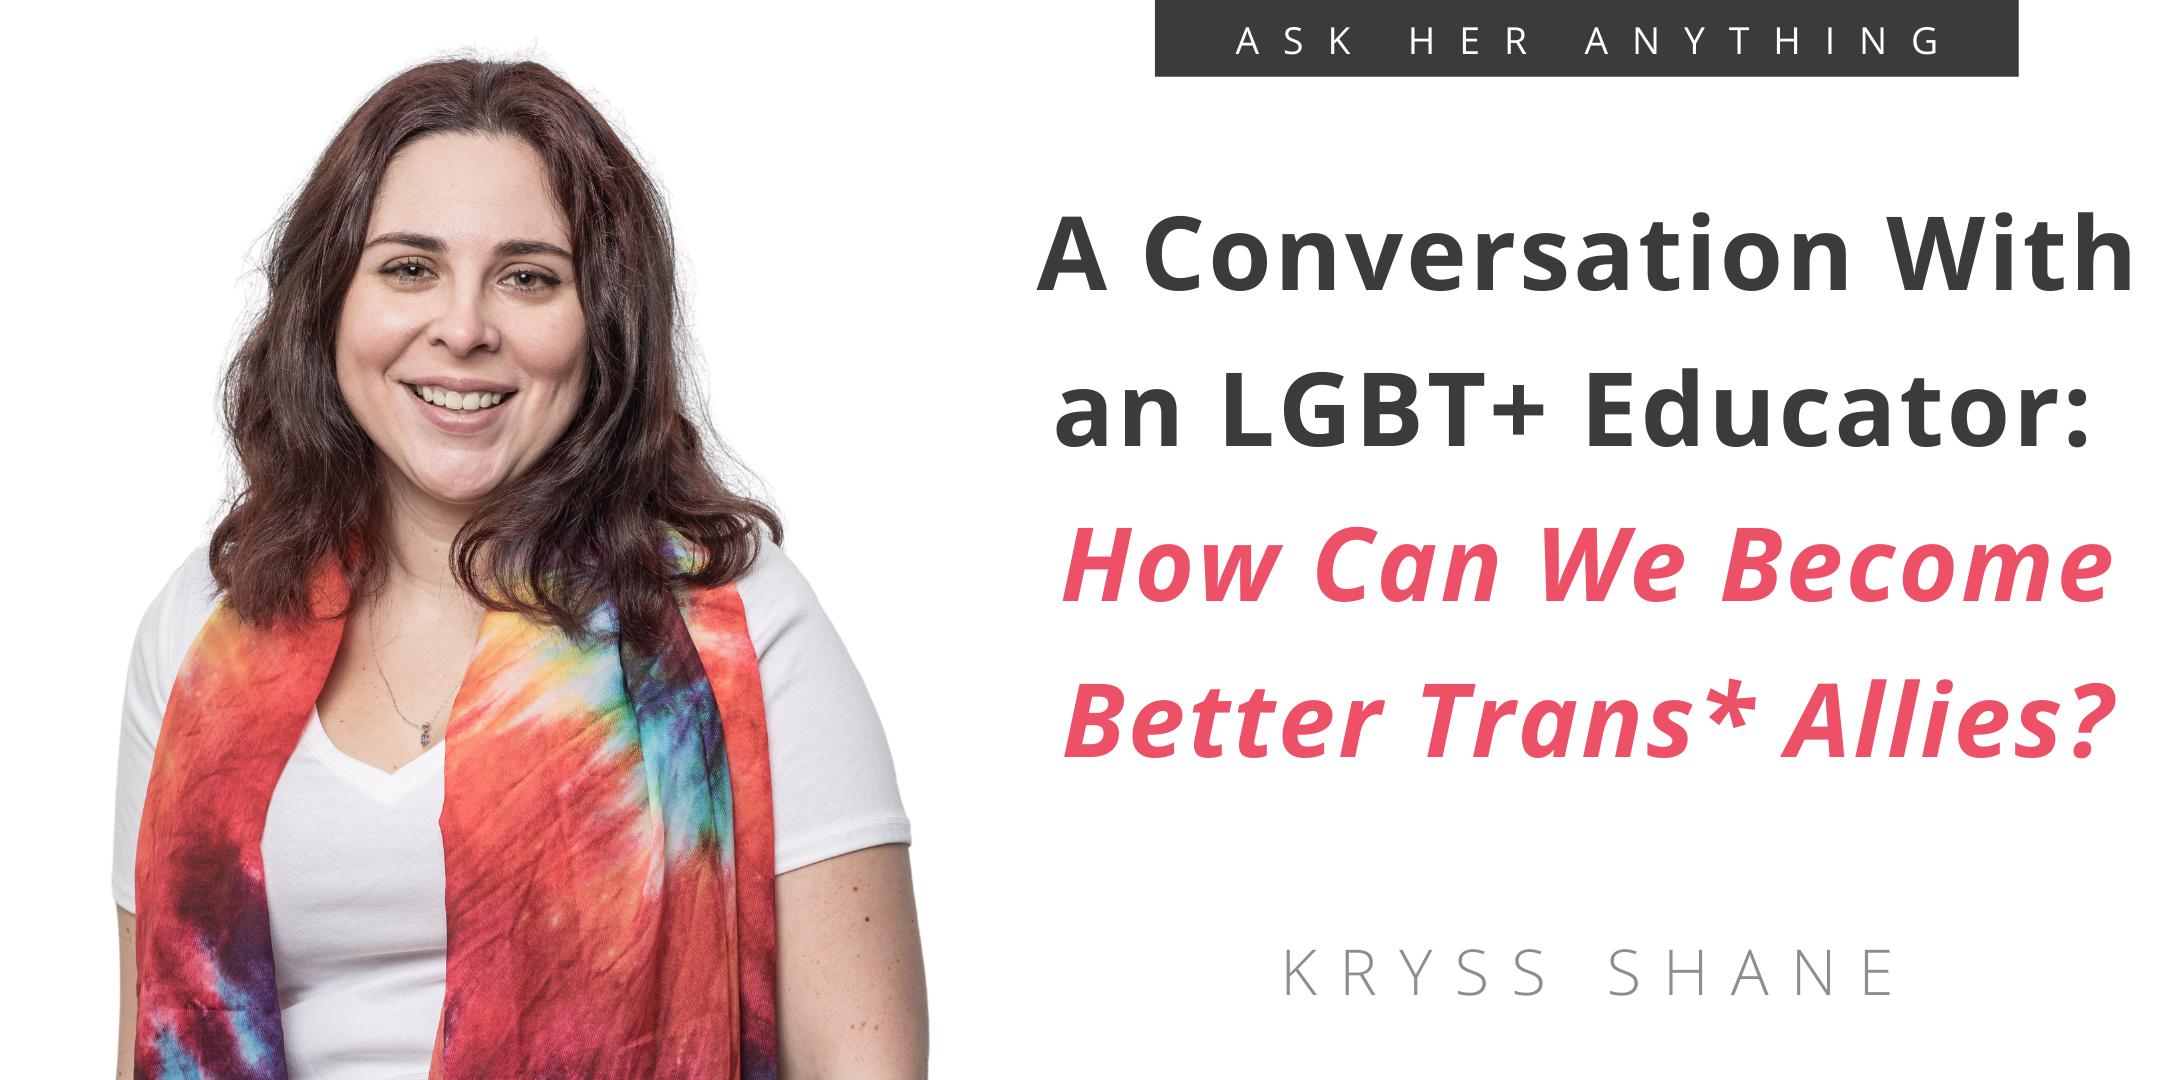 A Conversation With an LGBT+ Educator: How Can We Become Better Trans*  Allies?